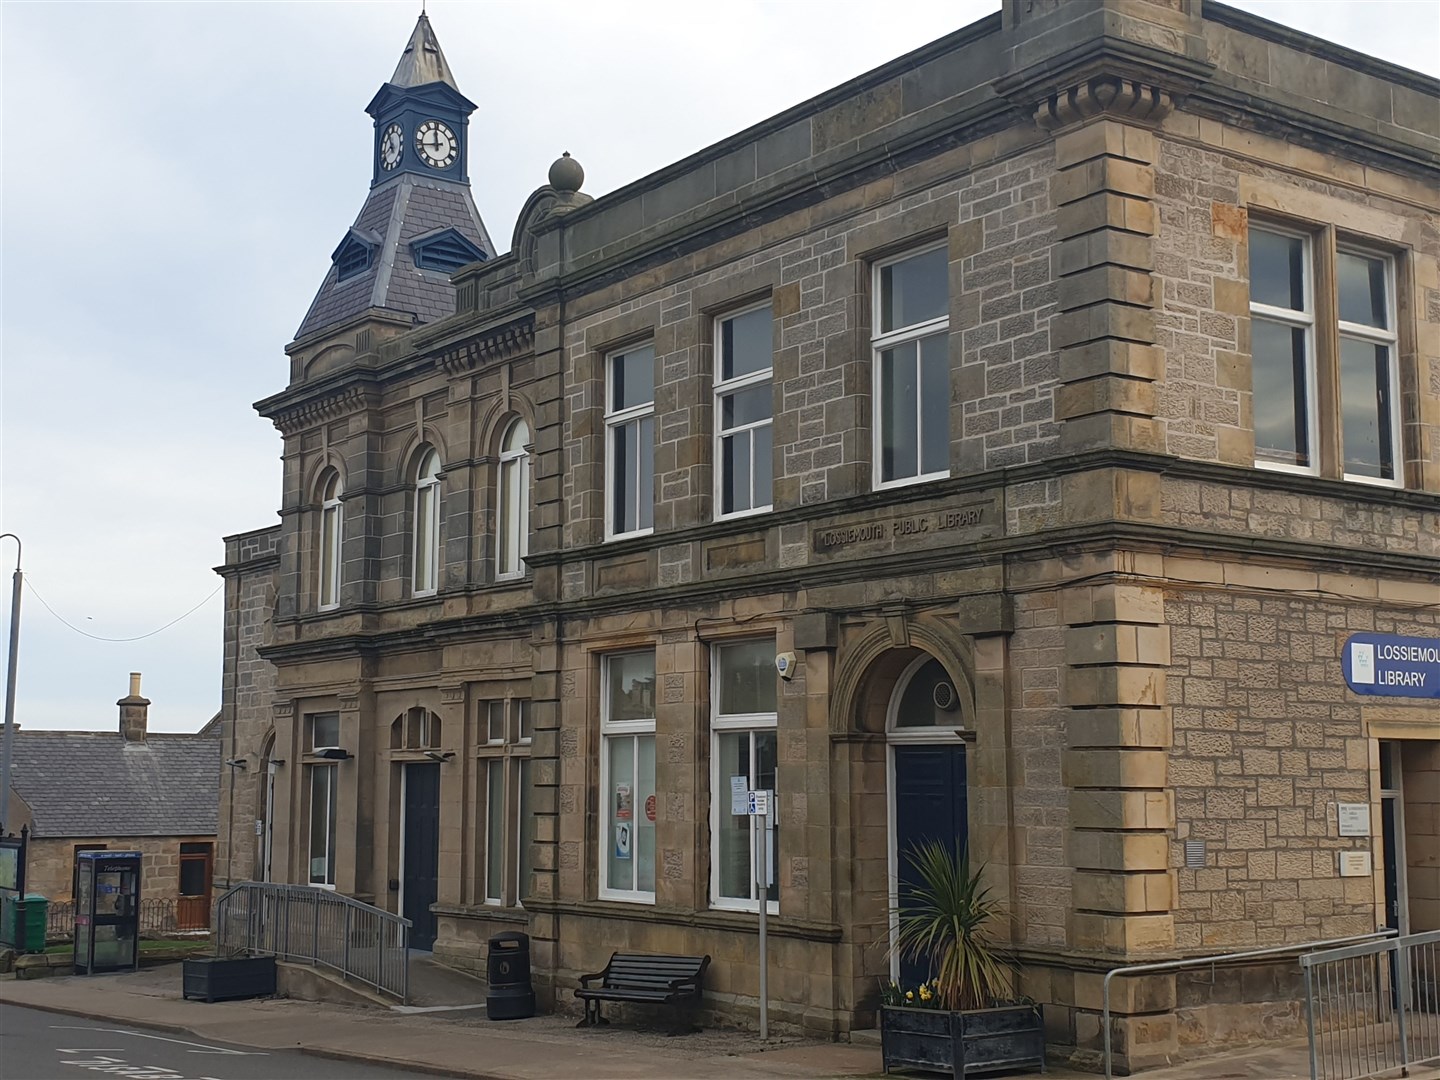 Lossiemouth Town Hall will be the venue for Covid-19 testing in Lossiemouth.